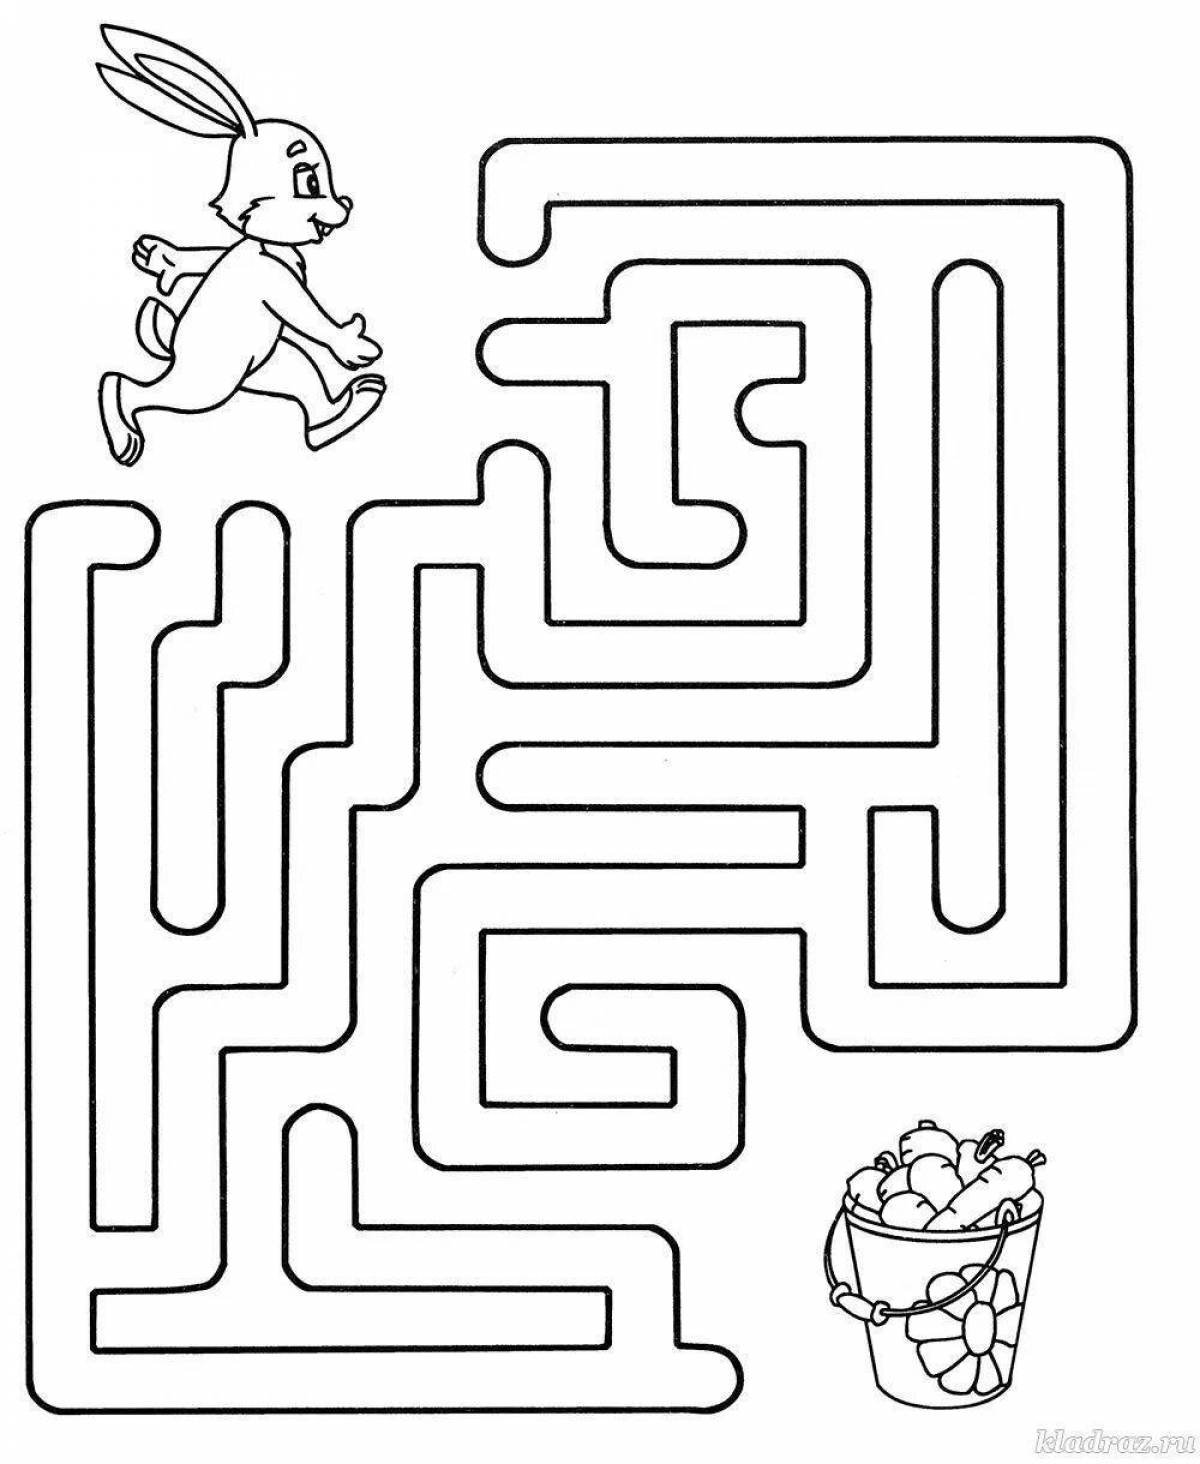 Mazes for children 4 5 years old #8